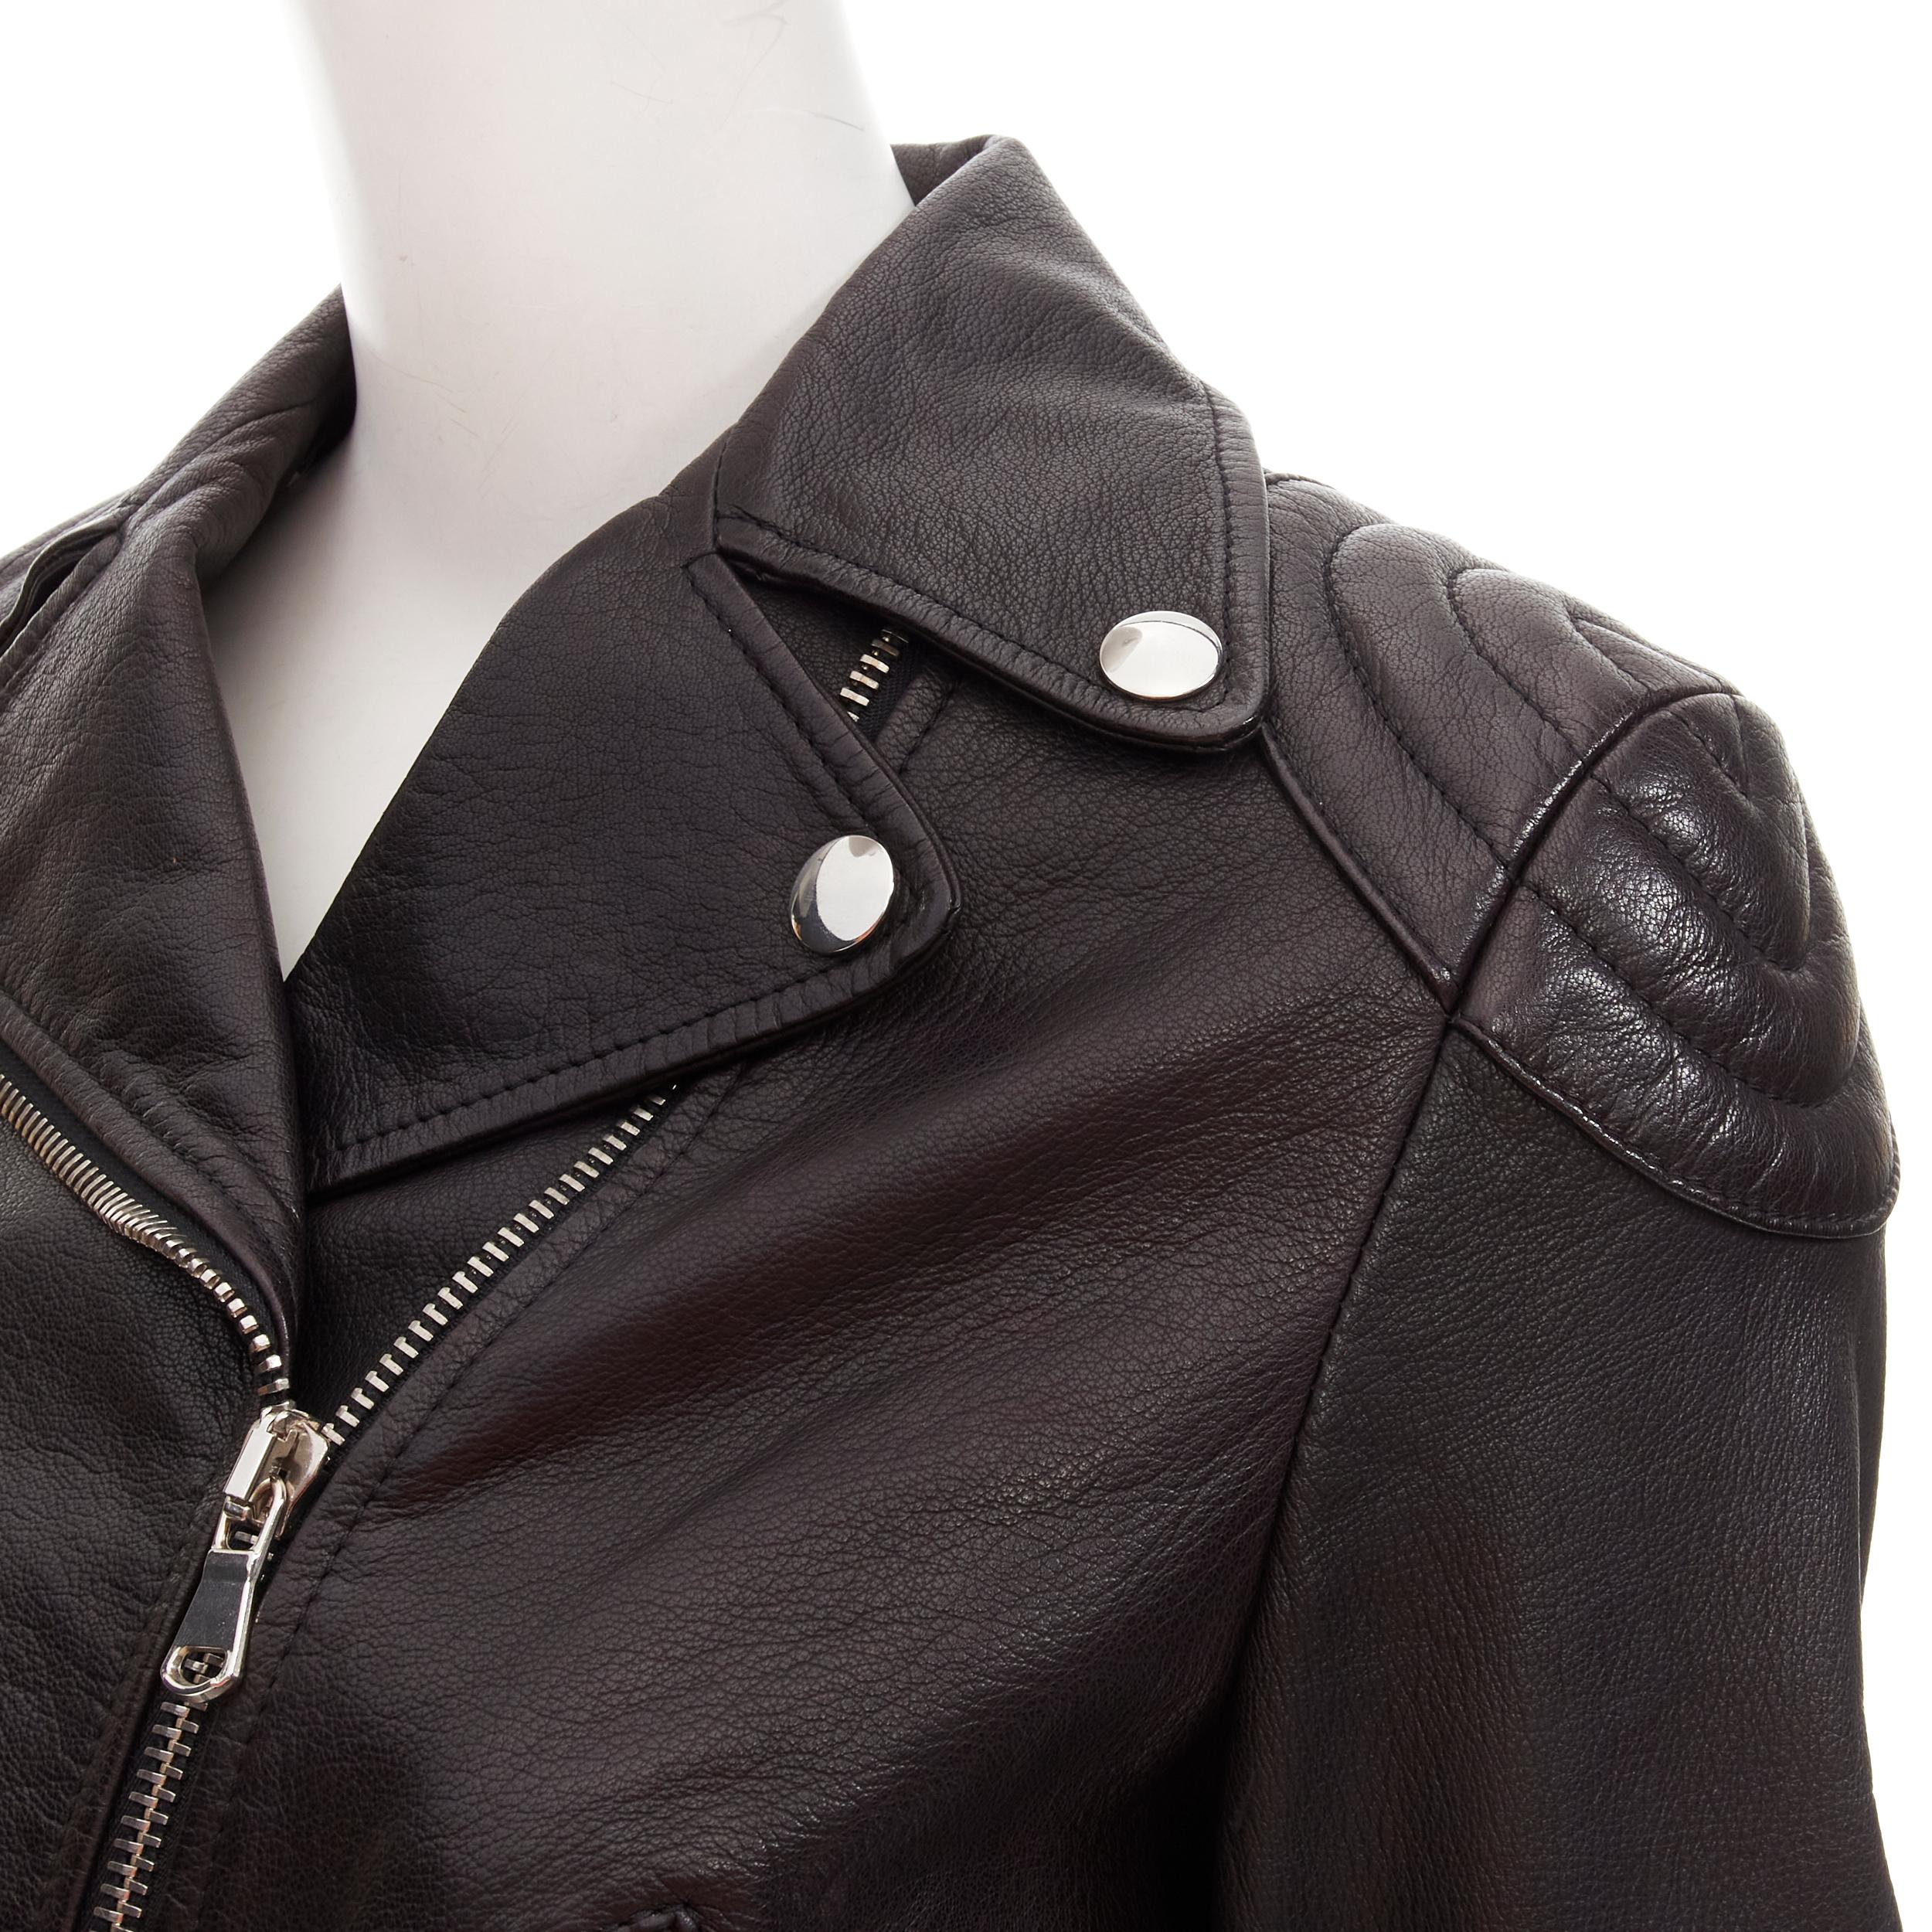 MOSCHINO genuine leather black classic cropped moto biker jacket IT40 S
Reference: TGAS/C01925
Brand: Moschino
Designer: Jeremy Scott
Material: Leather
Color: Black
Pattern: Solid
Closure: Zip
Lining: Black Fabric
Extra Details: Padded shoulder